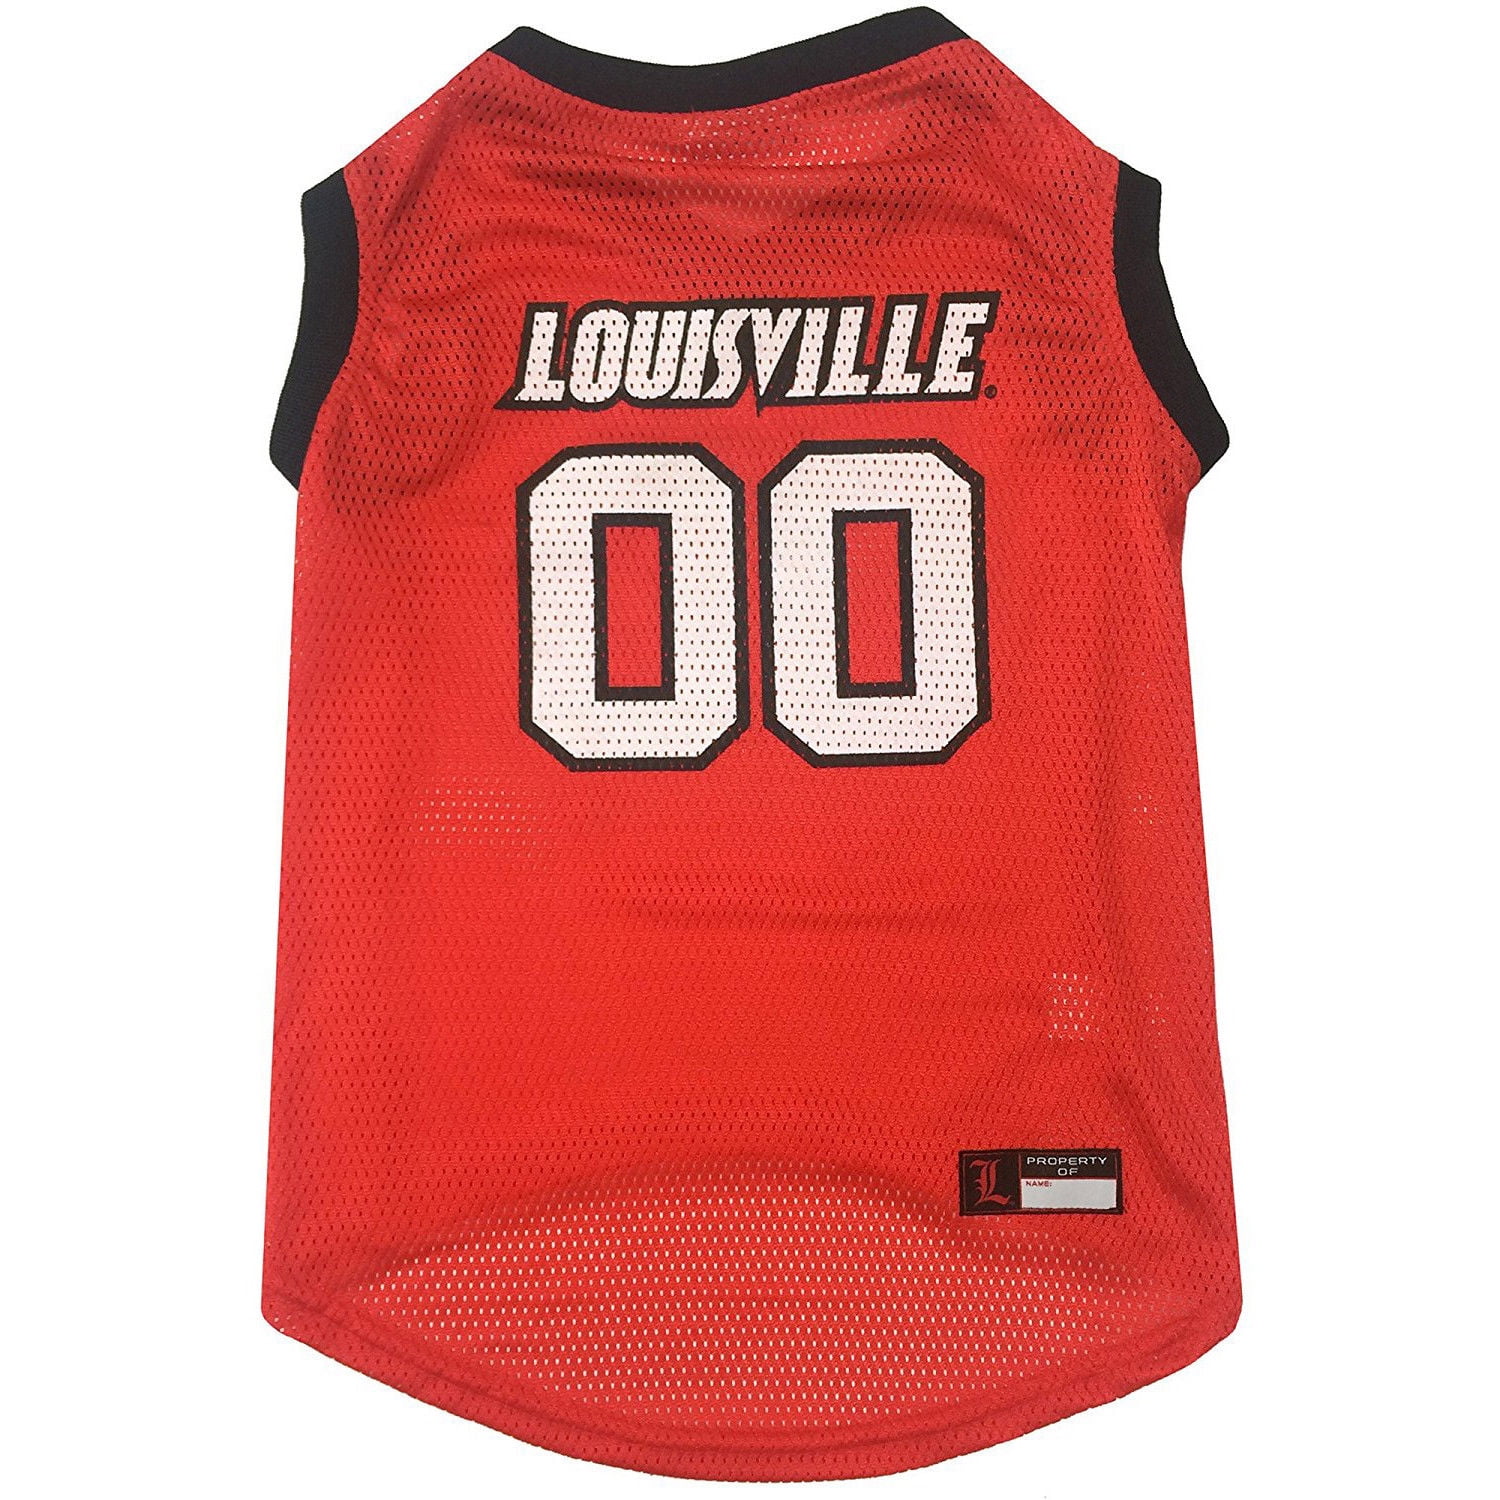 Pets First NCAA Louisville Cardinals Basketball Mesh Jersey - Licensed,  Brand NEW, 5 Collegiate Teams in 6 sizes 